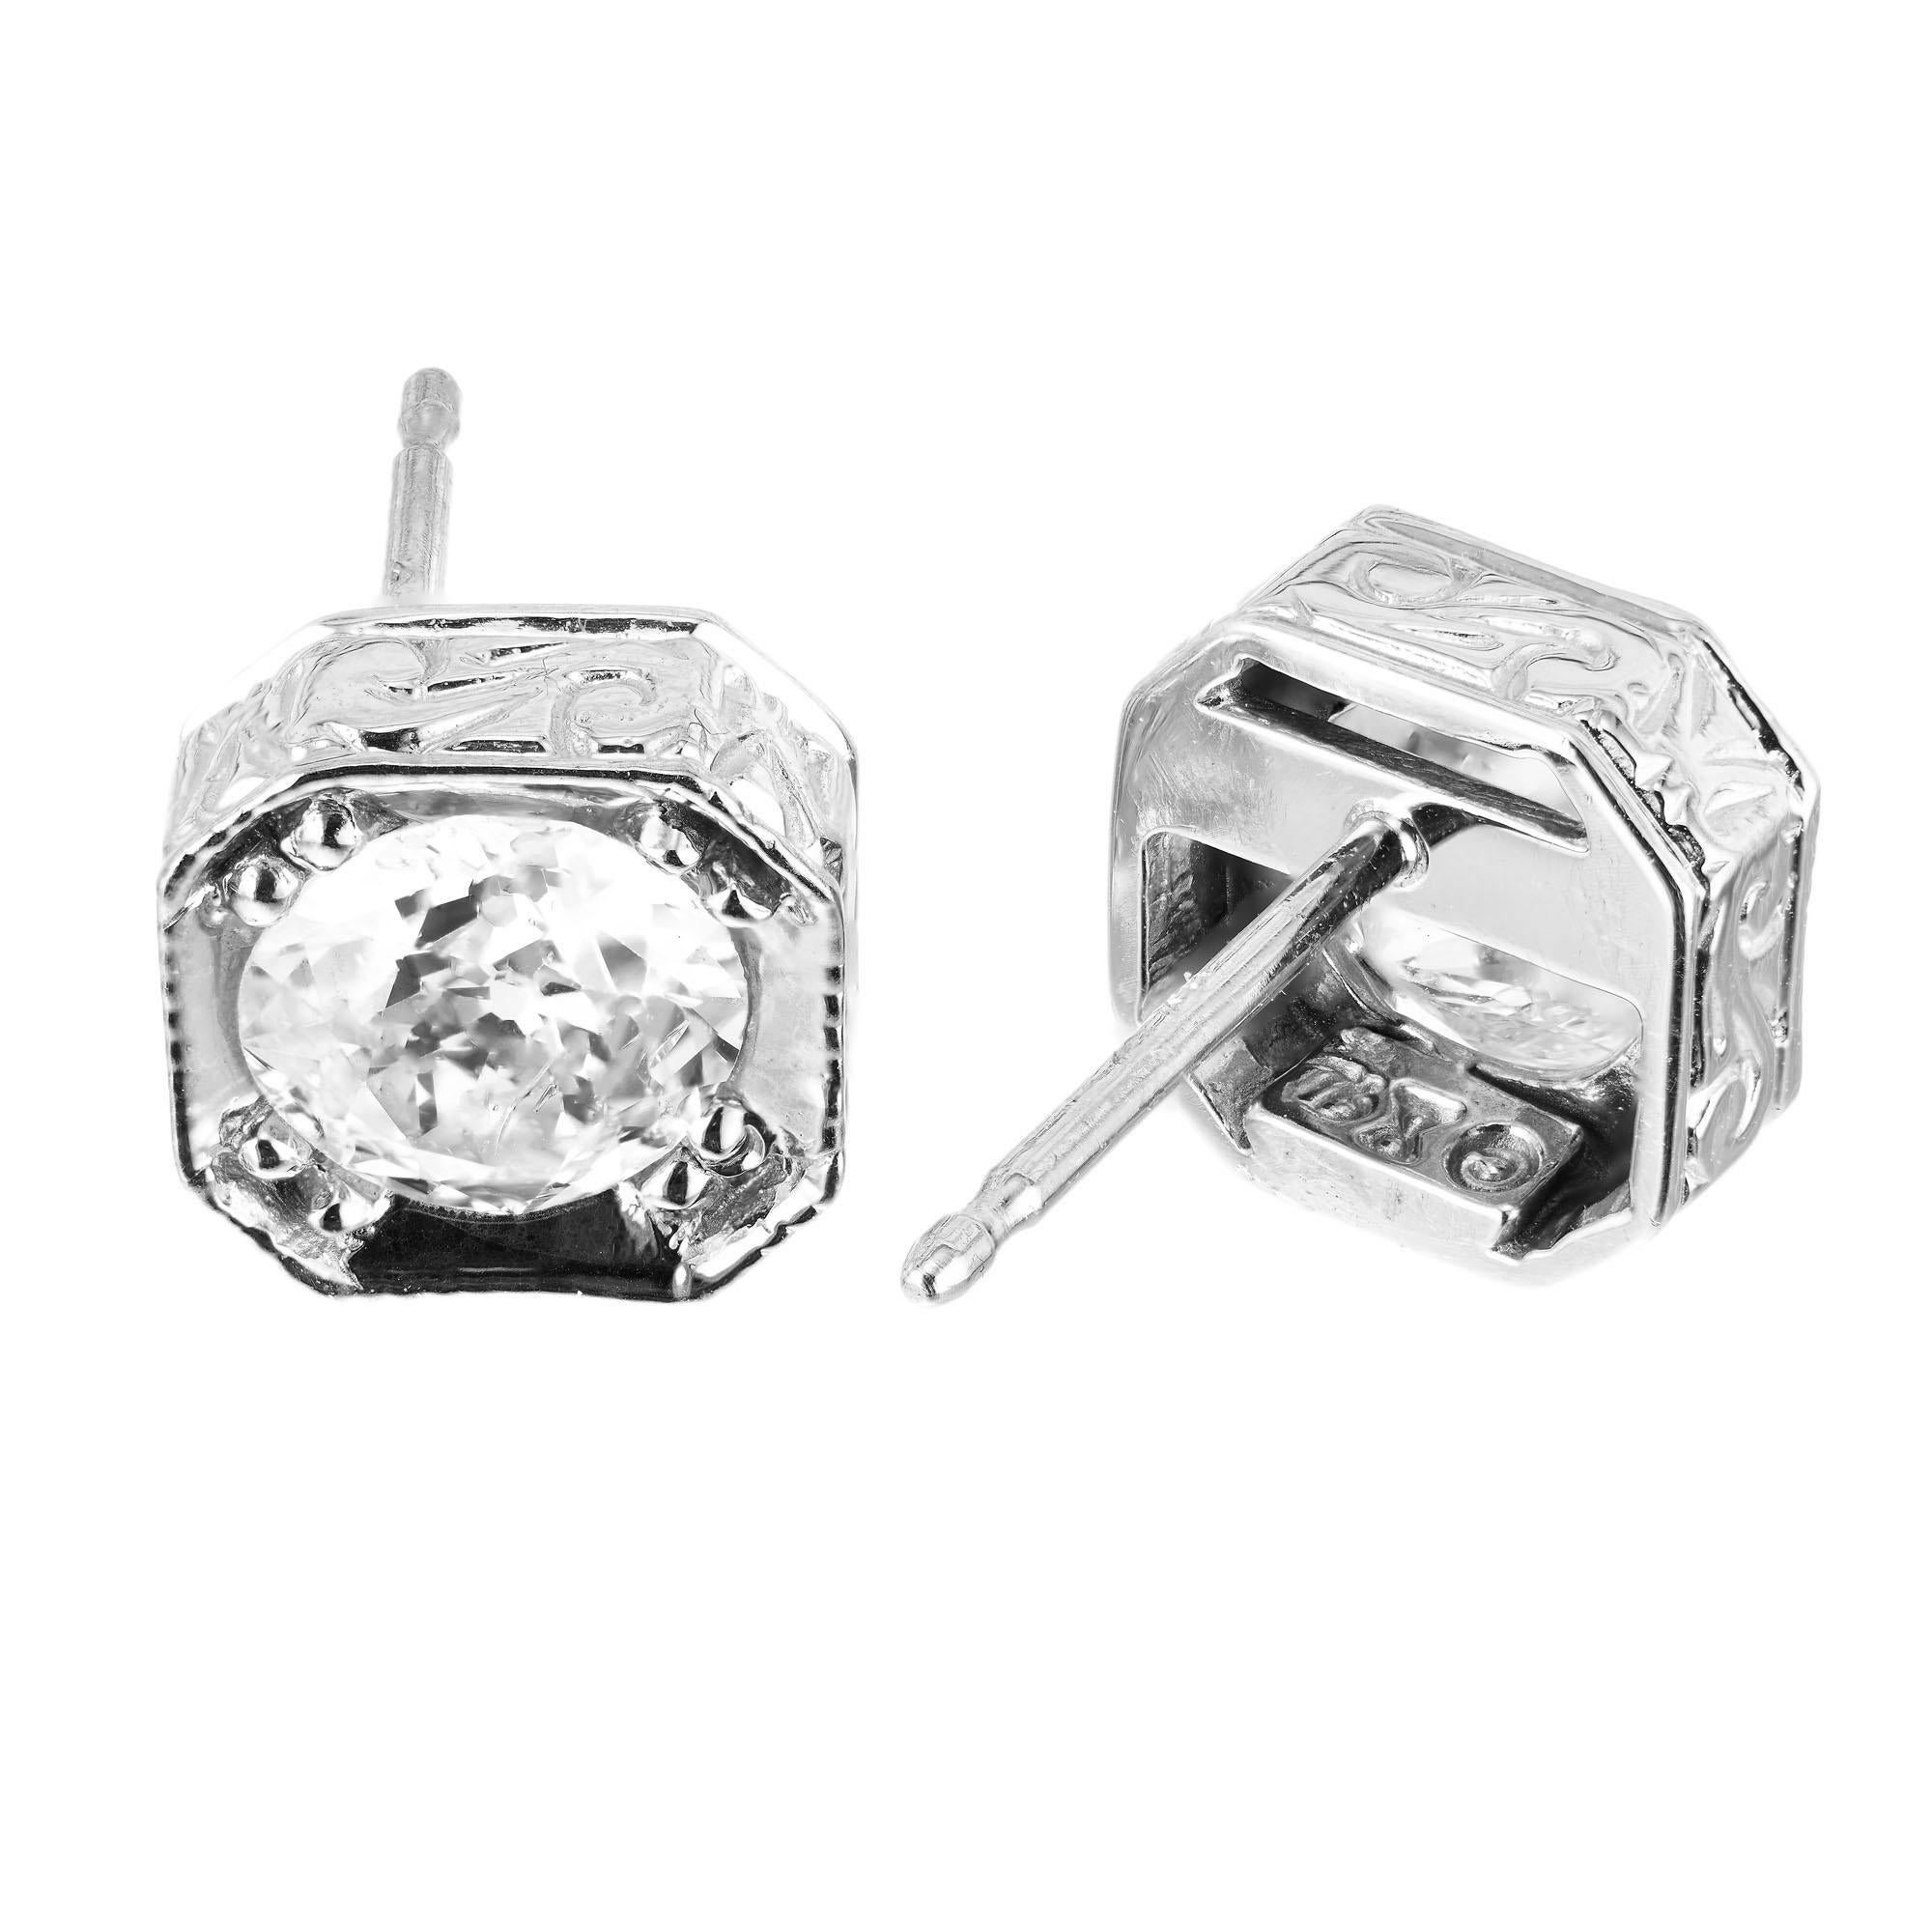 1.22ct diamond stud earrings, set in 18k vintage 8 sided settings with engraved sides. Crafted in the Peter Suchy Workshop

2 round diamonds approx total weight: 1.22cts I, SI2
18k white gold
2.6 grams
